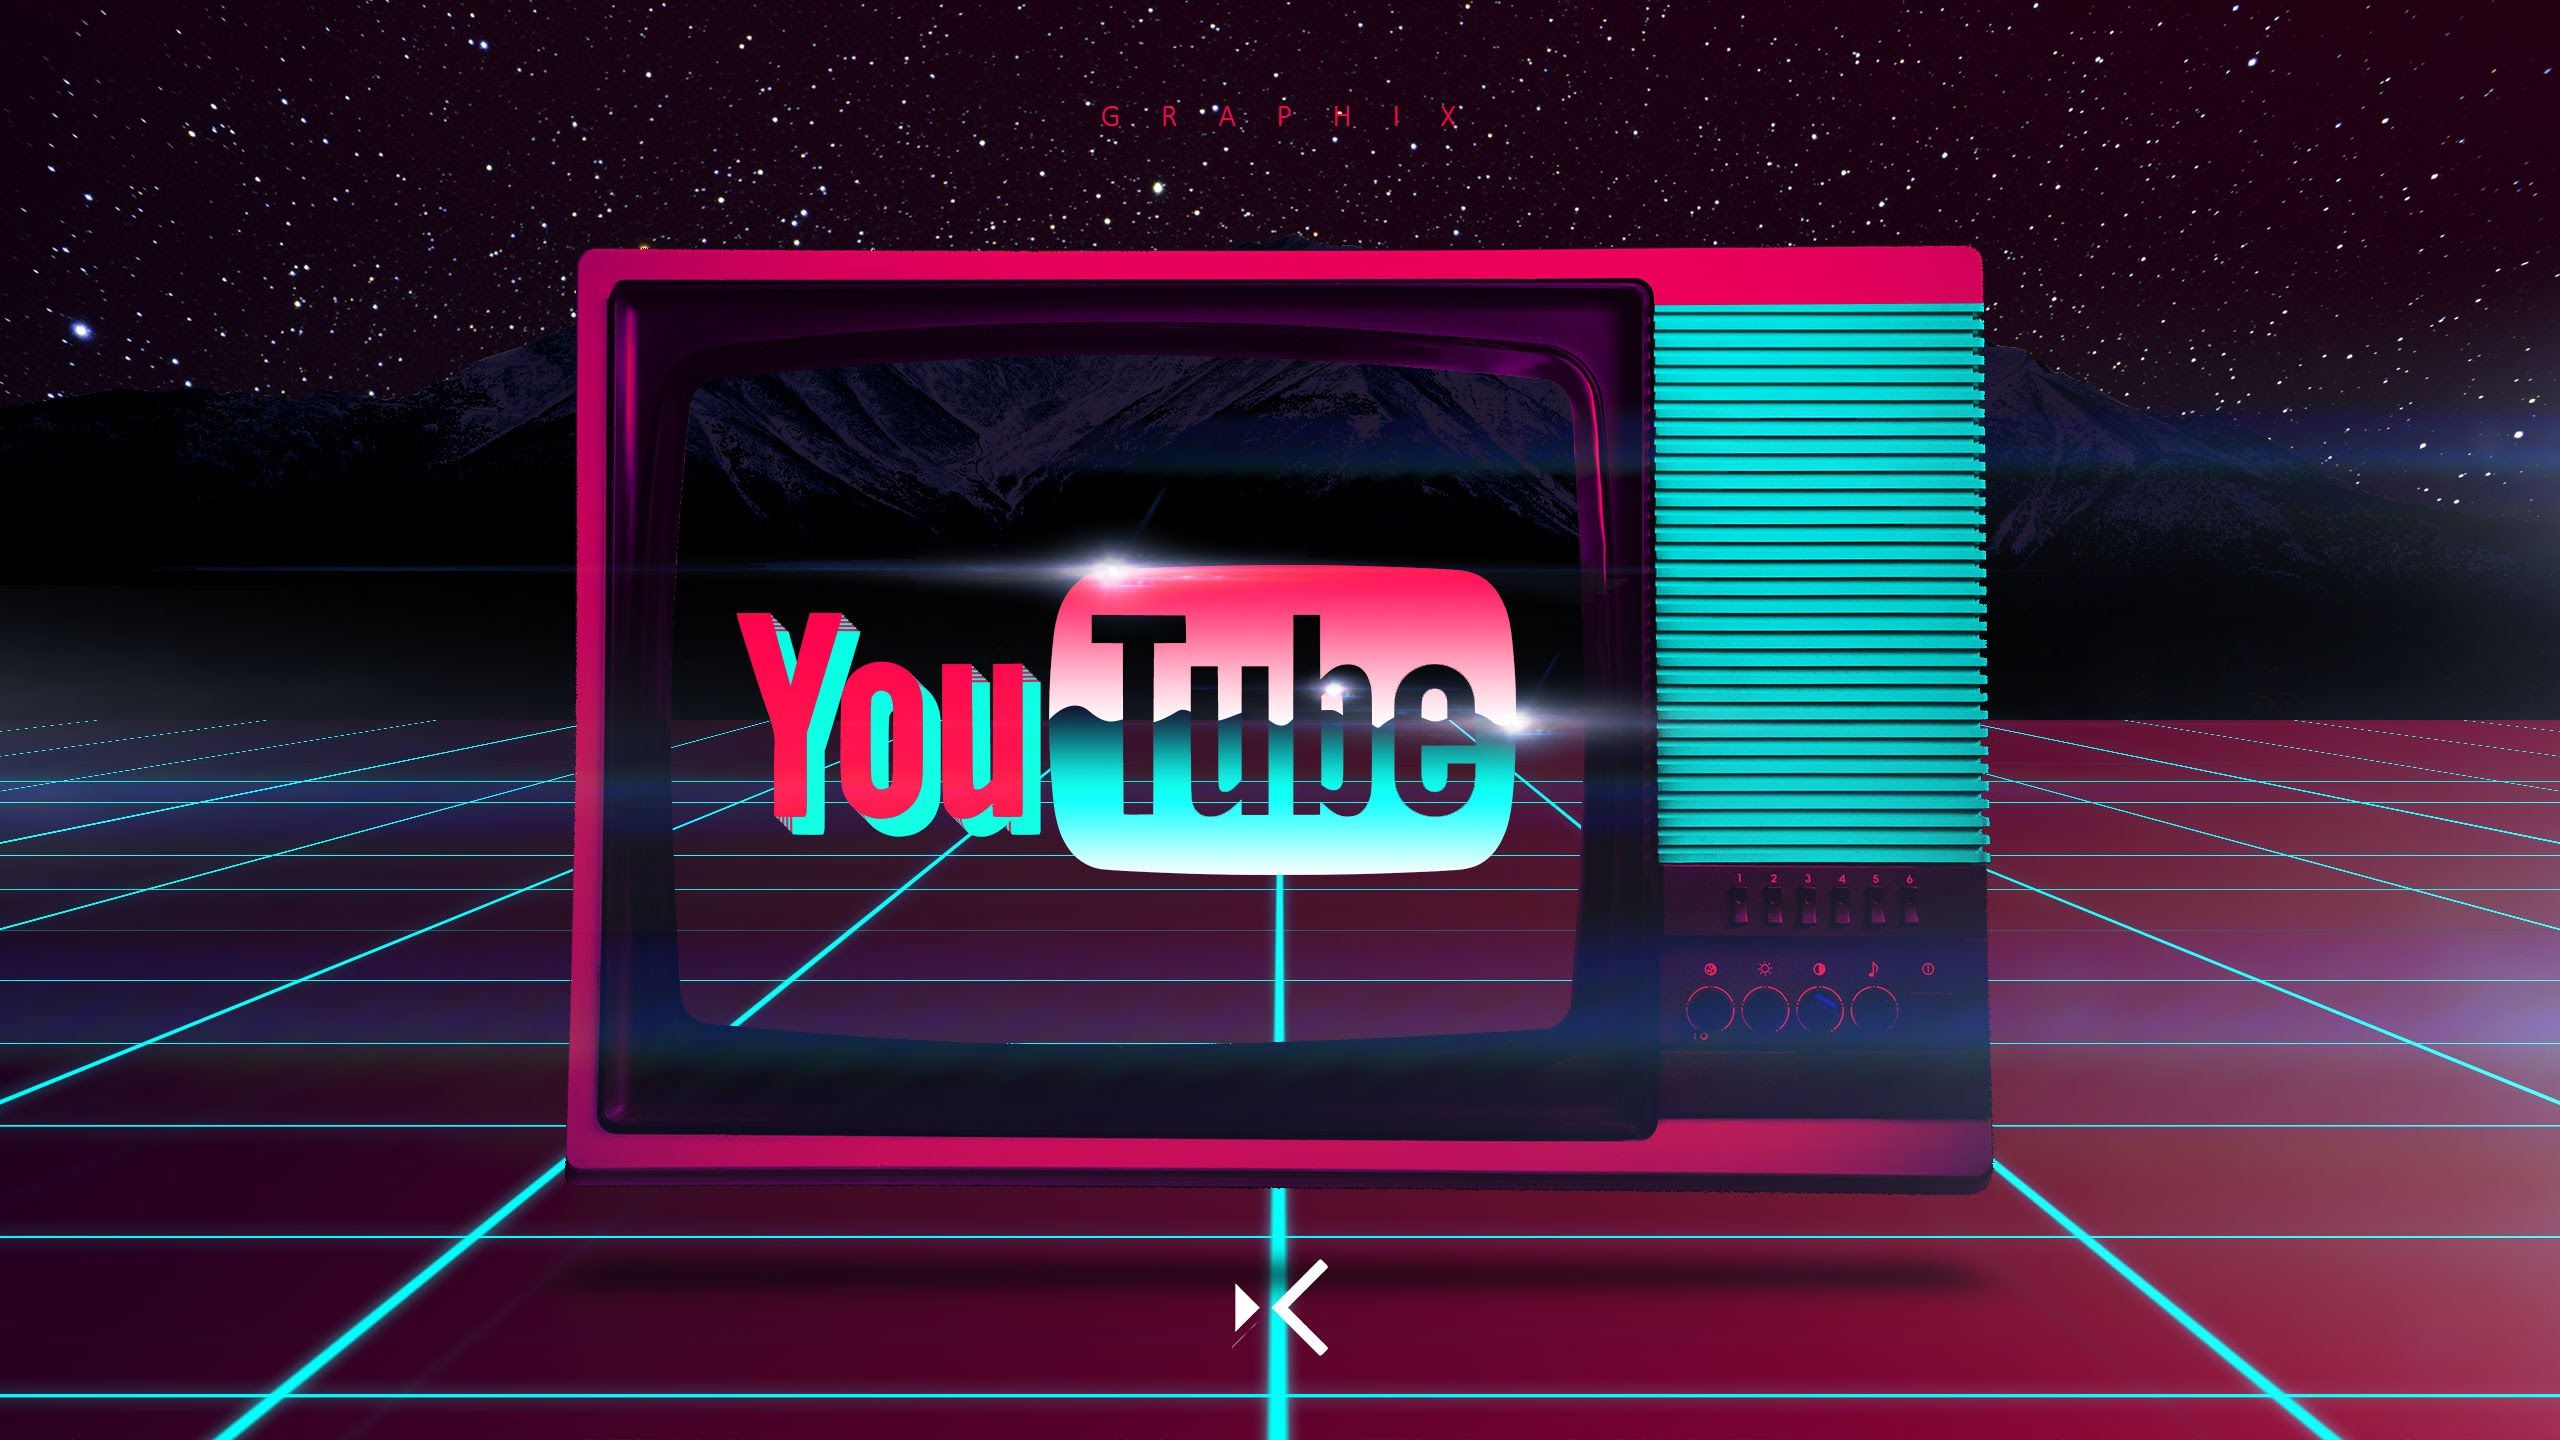 YouTube Background. YouTube Wallpaper, Awesome YouTube Background and Cute YouTube Background